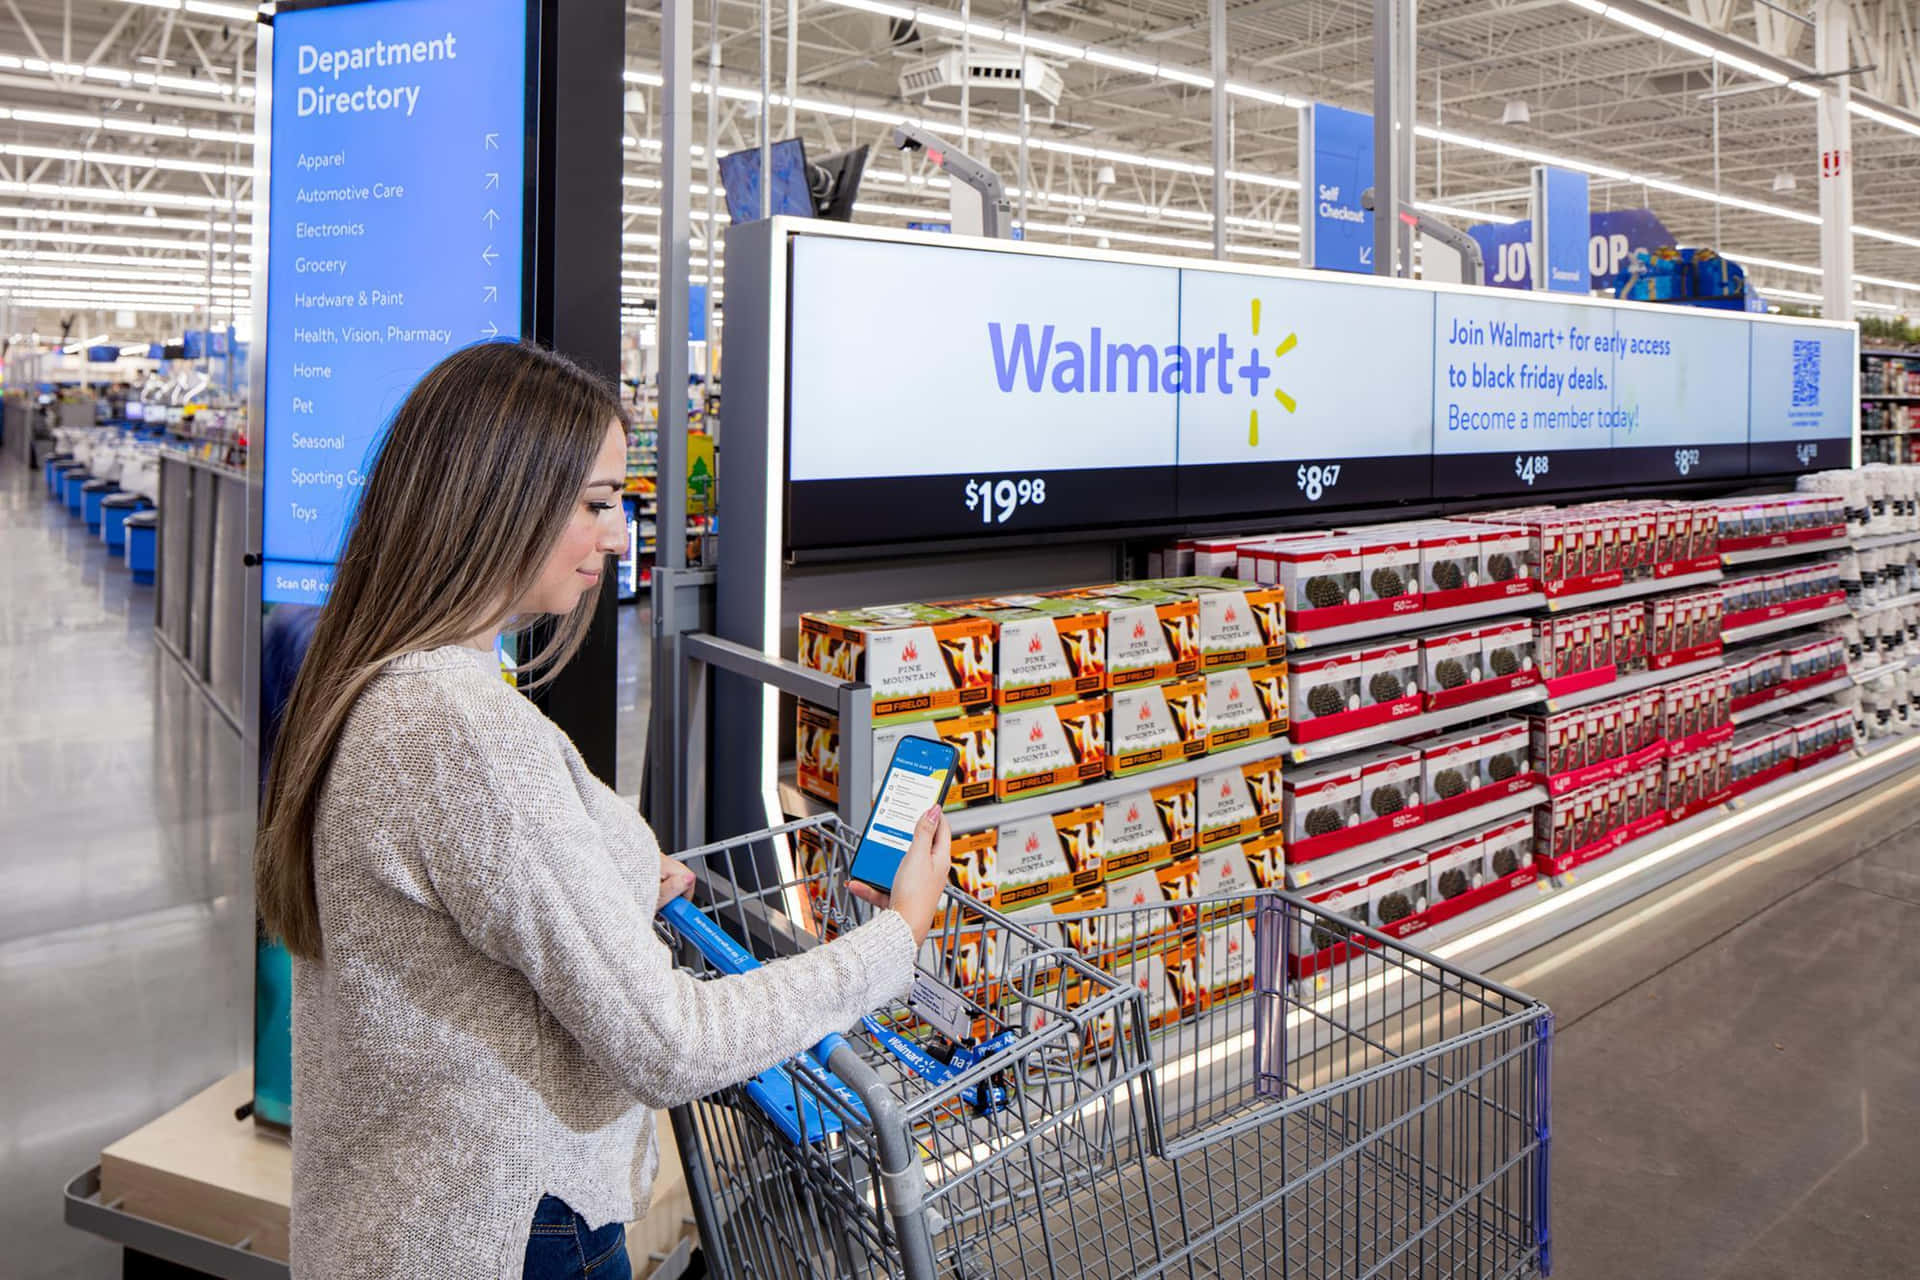 Walmart shoppers happily browsing aisles